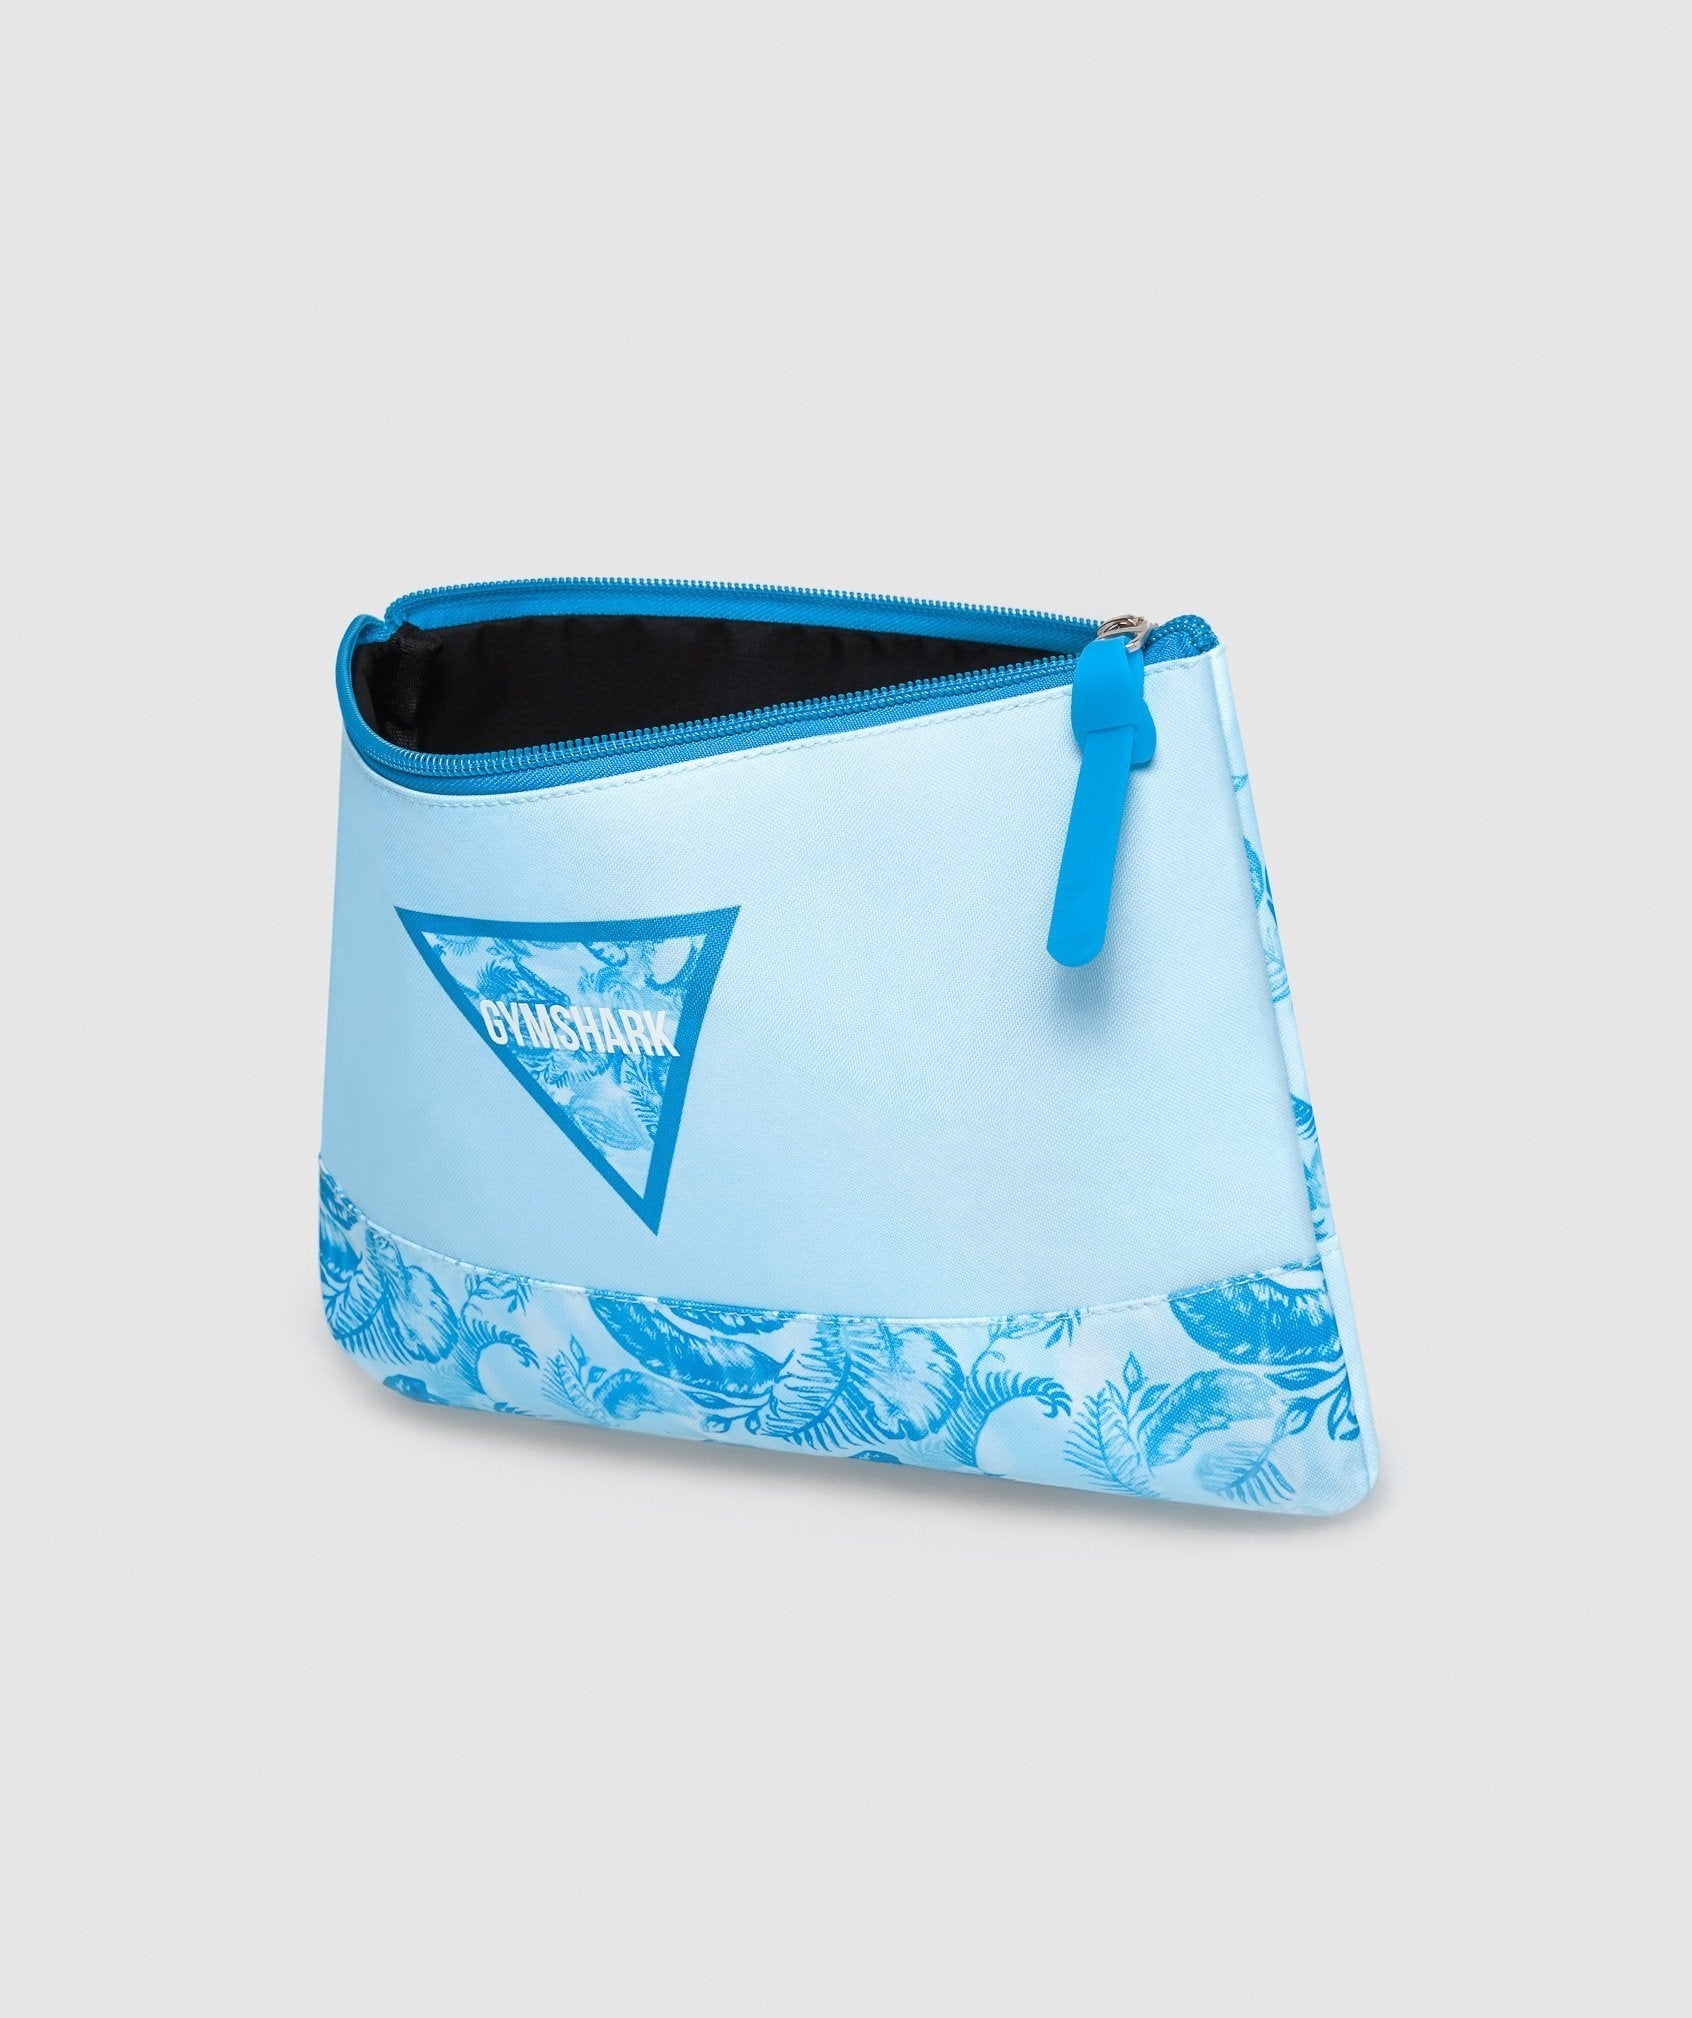 Womens Surf Dry Bag in Blue - view 5